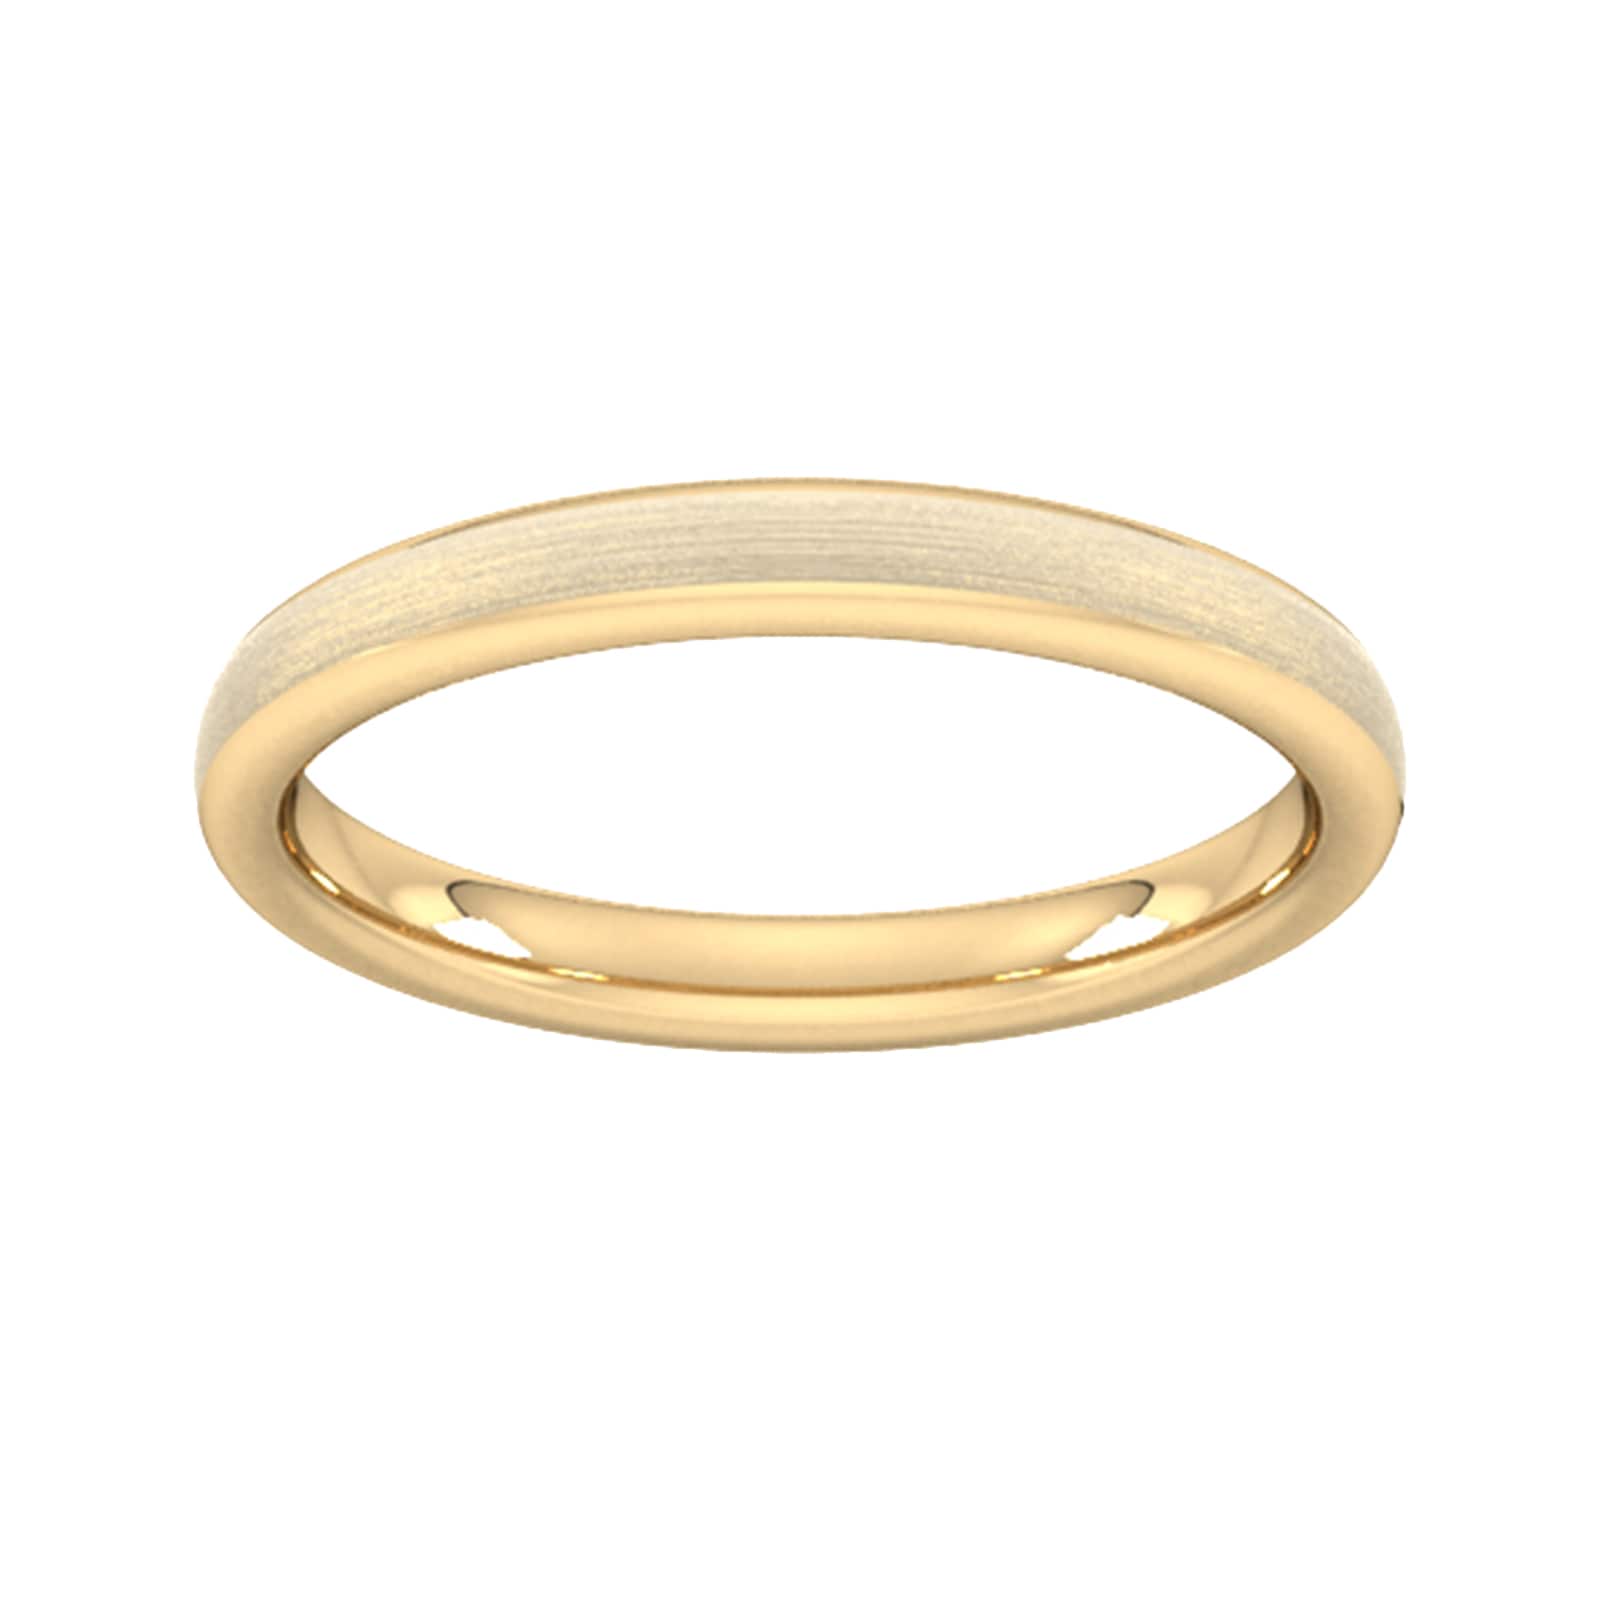 2.5mm Traditional Court Heavy Matt Finished Wedding Ring In 18 Carat Yellow Gold - Ring Size V